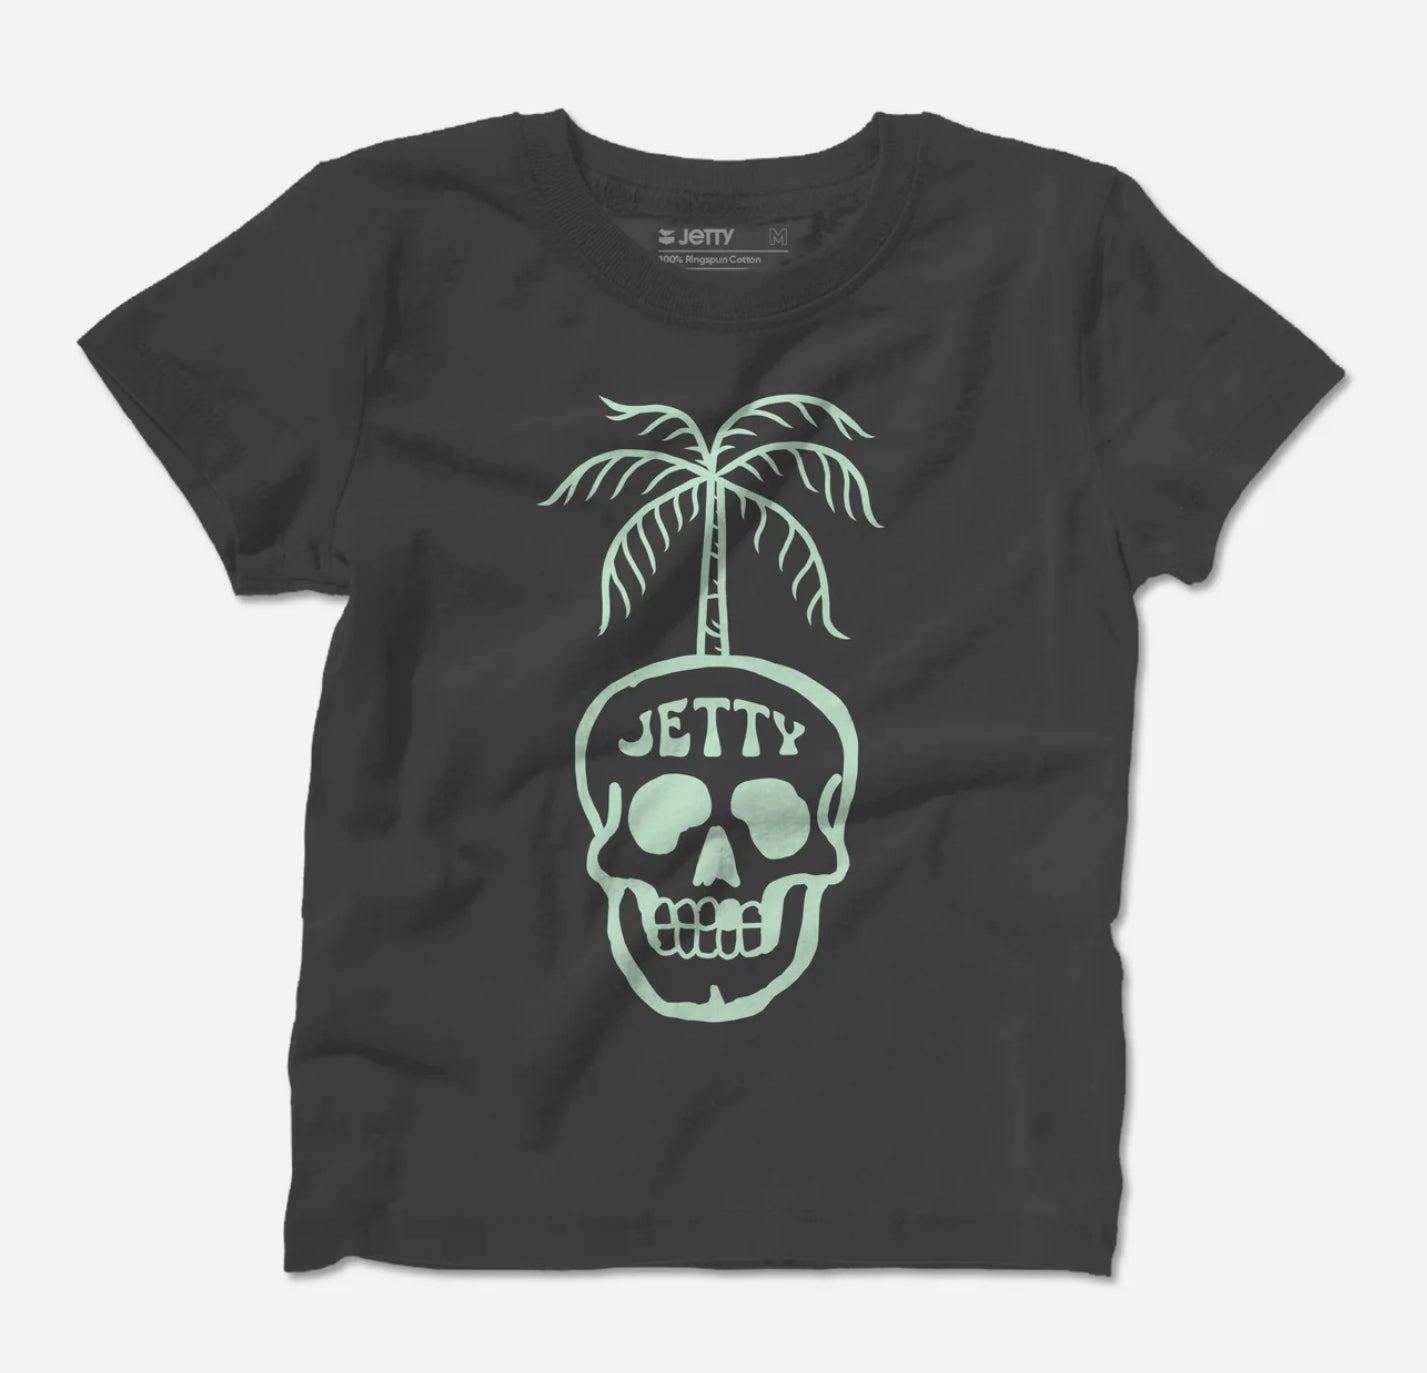 Jetty - Sprout Toddler Tee